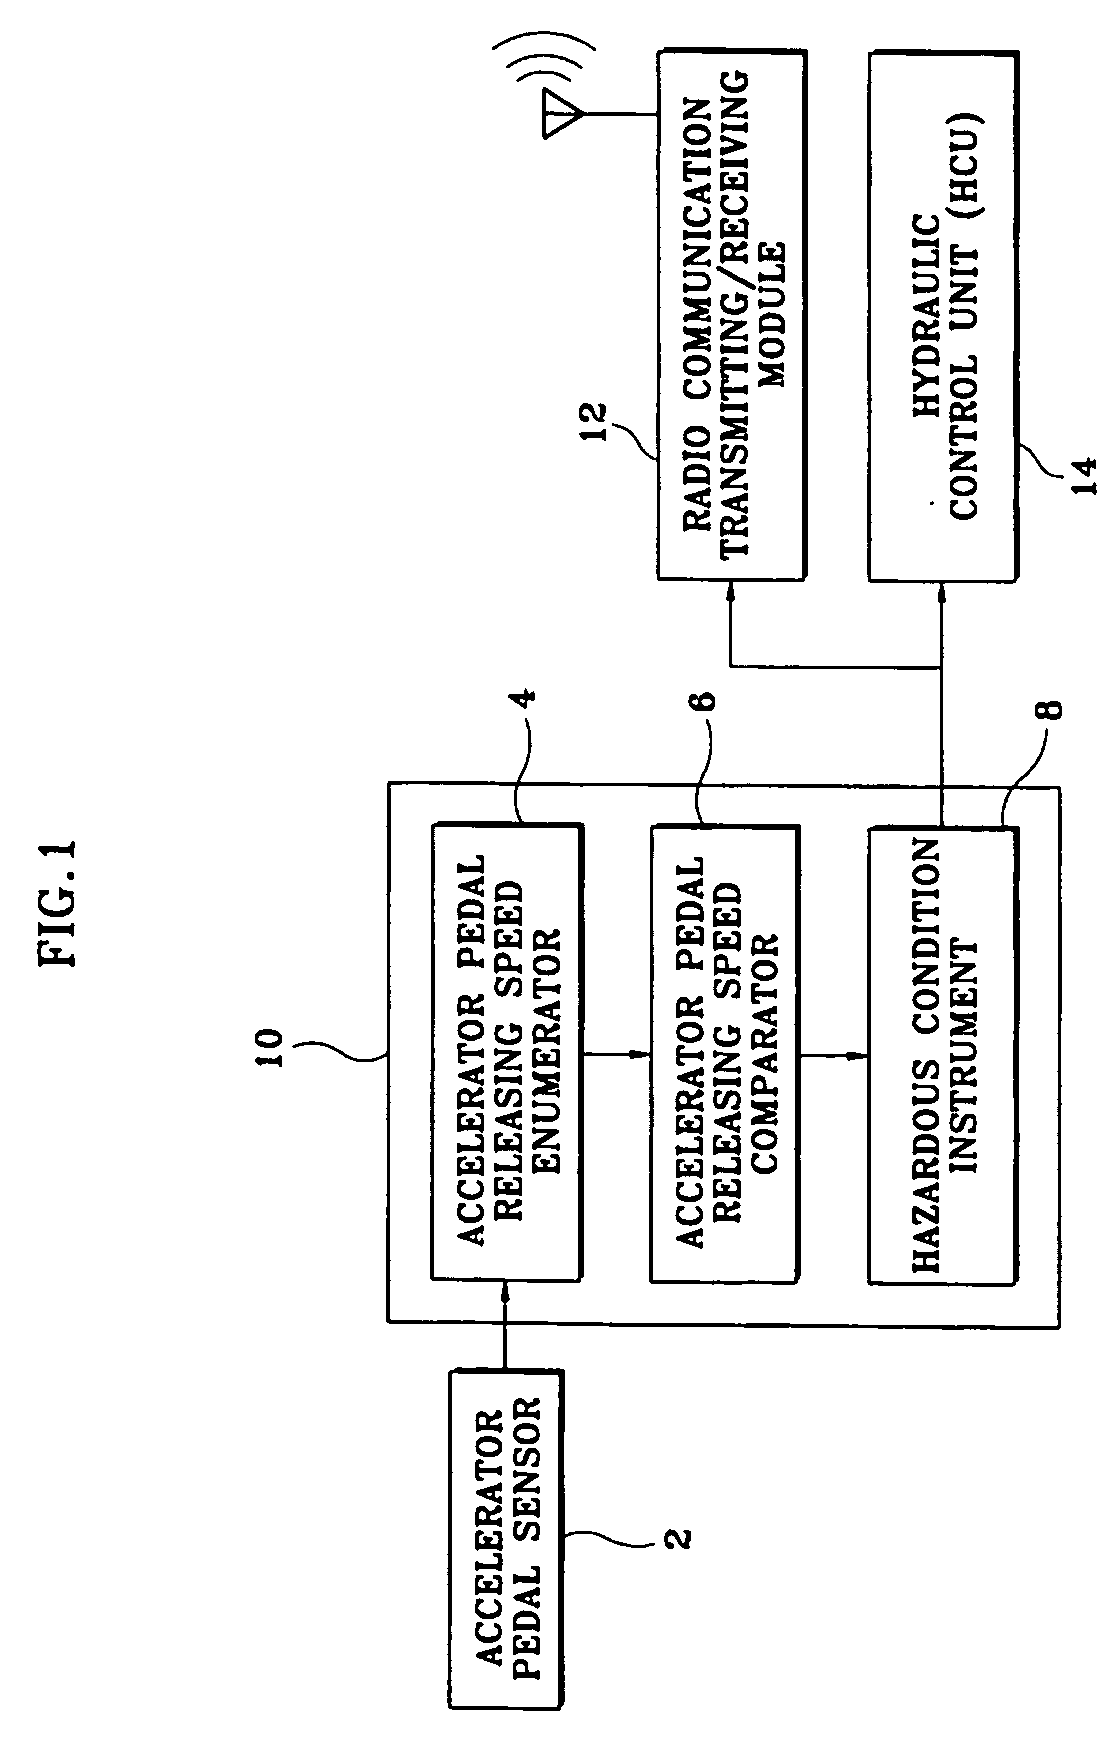 Apparatus and method for preventing vehicle collision using radio communication